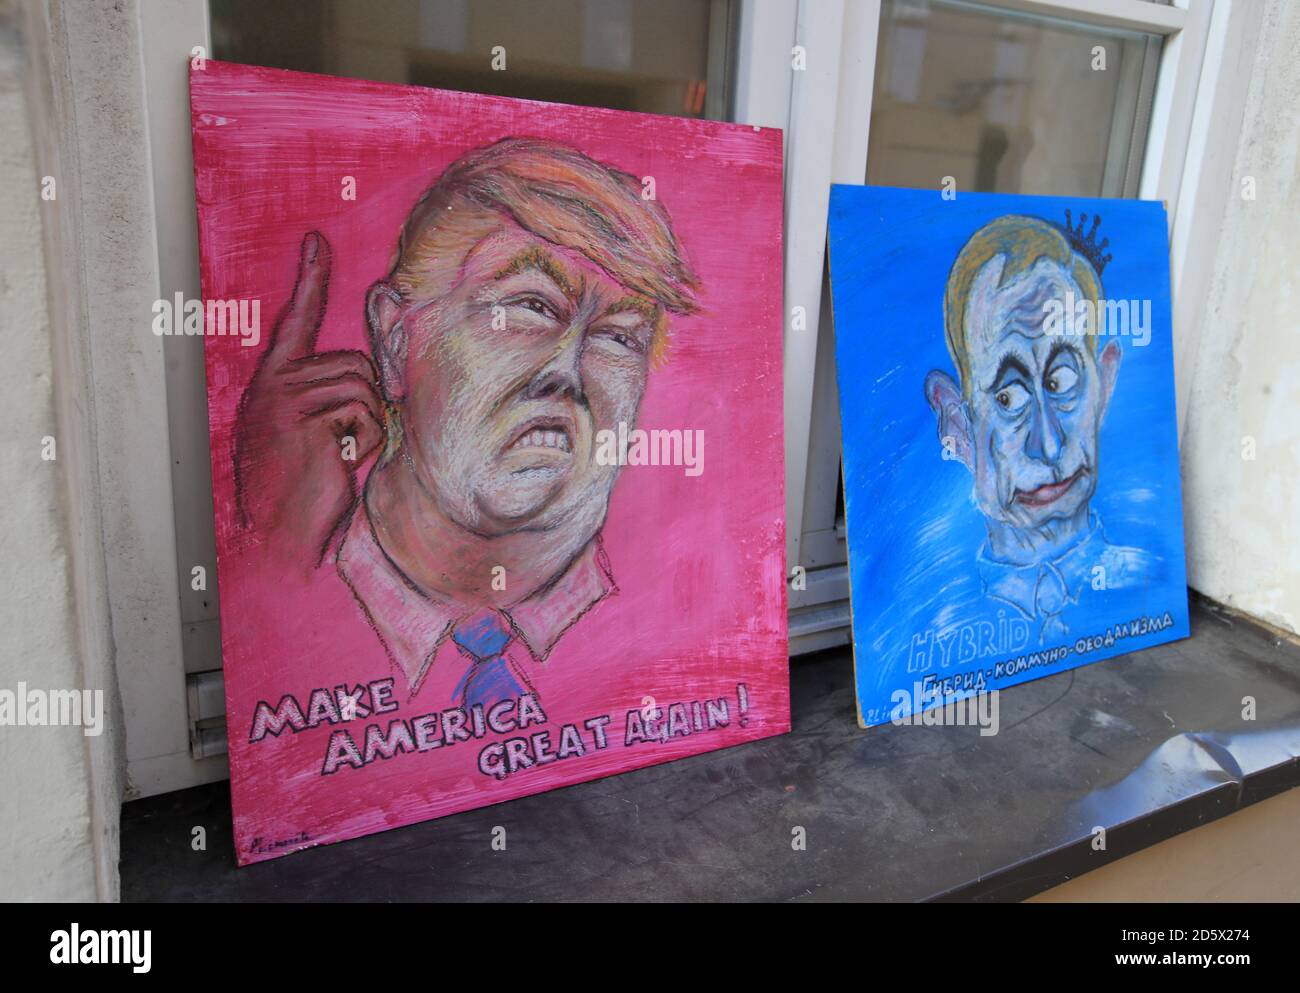 Artwork of Vladimir Putin and Donald Trump for sale during the 2018 FIFA World Cup Qualifying Group F match at the LFF Stadium, Vilnius. PRESS ASSOCIATION Photo. Picture date: Sunday October 8, 2017. See PA story SOCCER Lithuania. Photo credit should read: Mike Egerton/PA Wire. RESTRICTIONS: Use subject to FA restrictions. Editorial use only. Commercial use only with prior written consent of the FA. No editing except cropping. Stock Photo